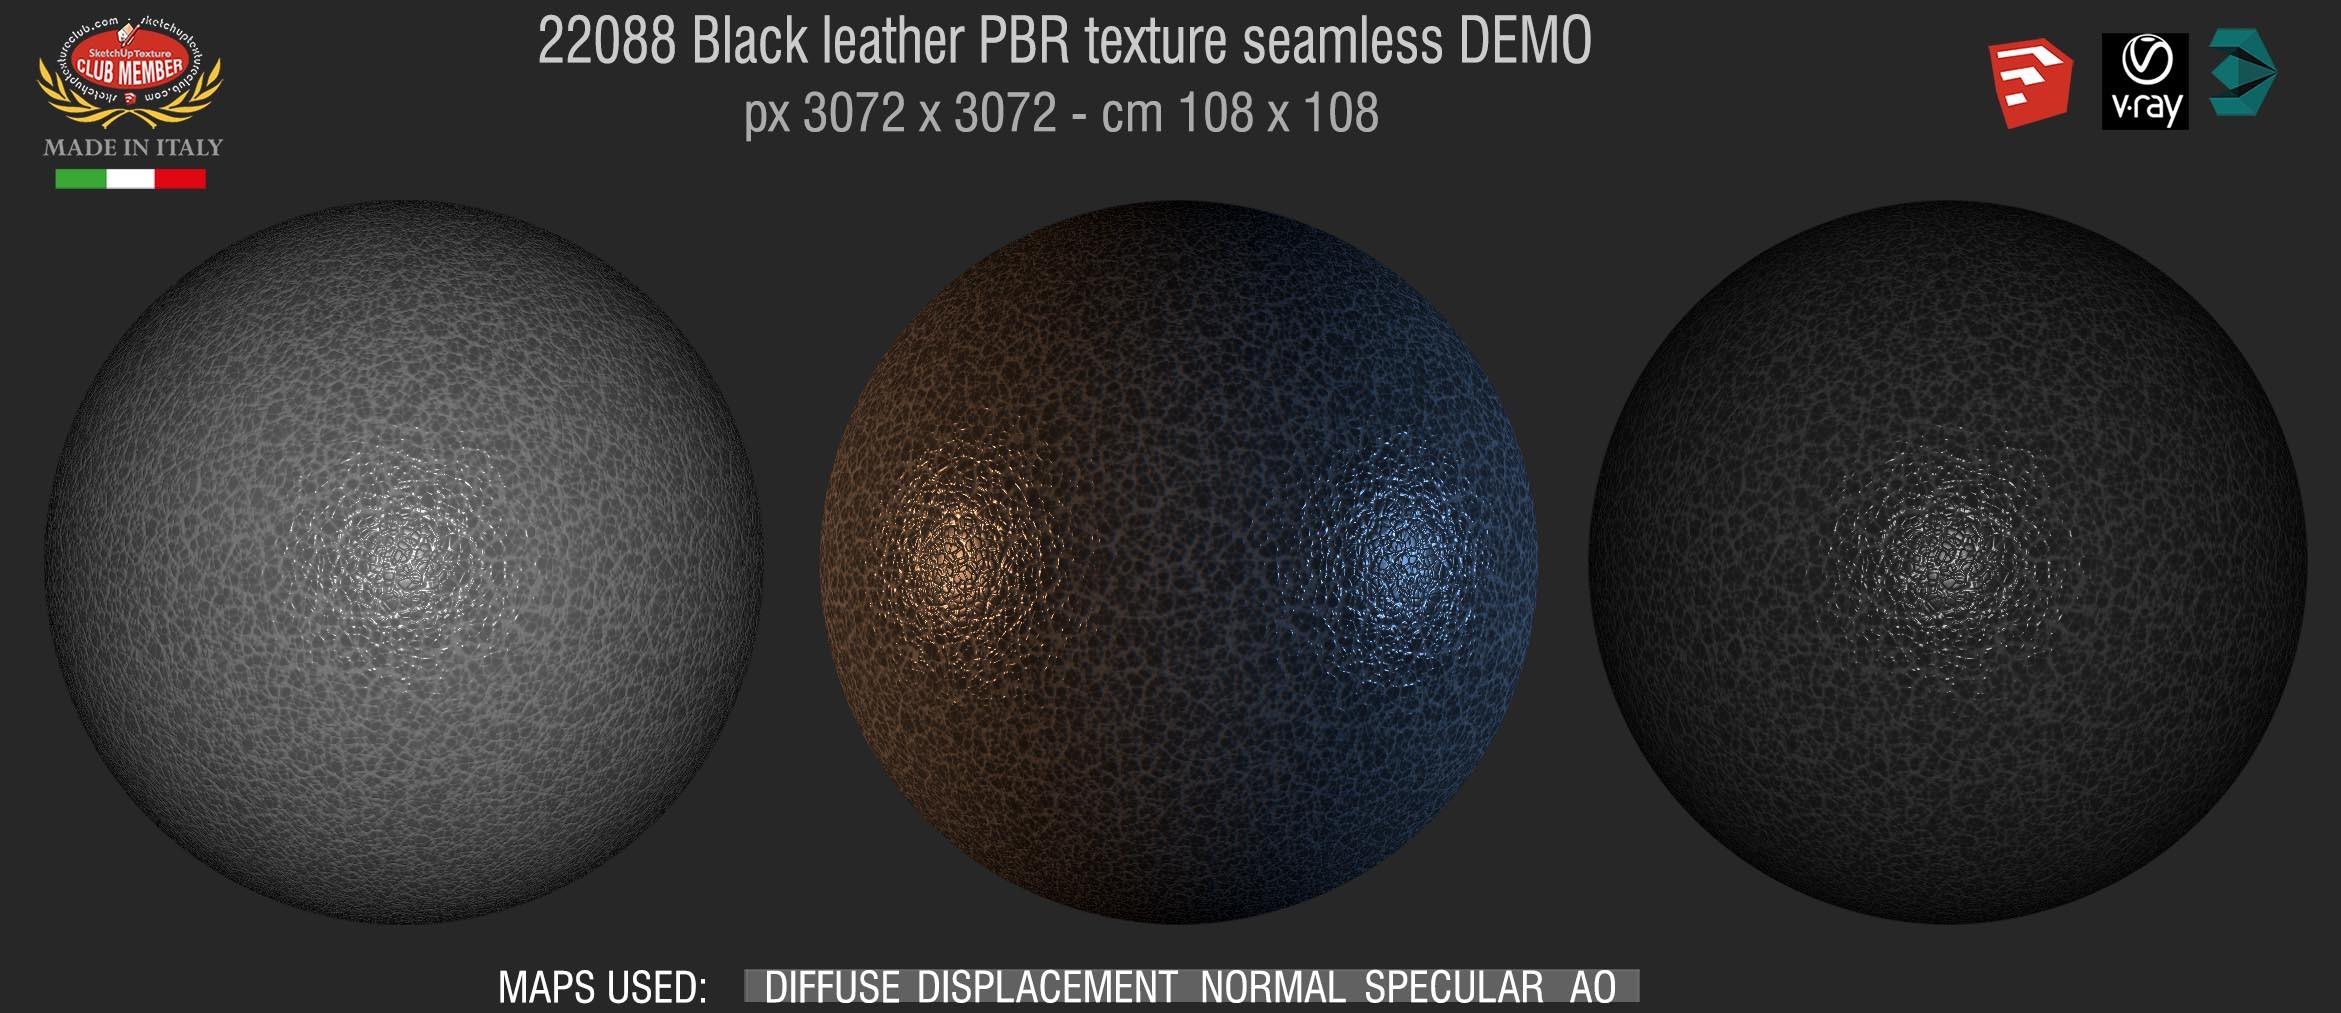 22088 Black leather PBR texture seamless DEMO